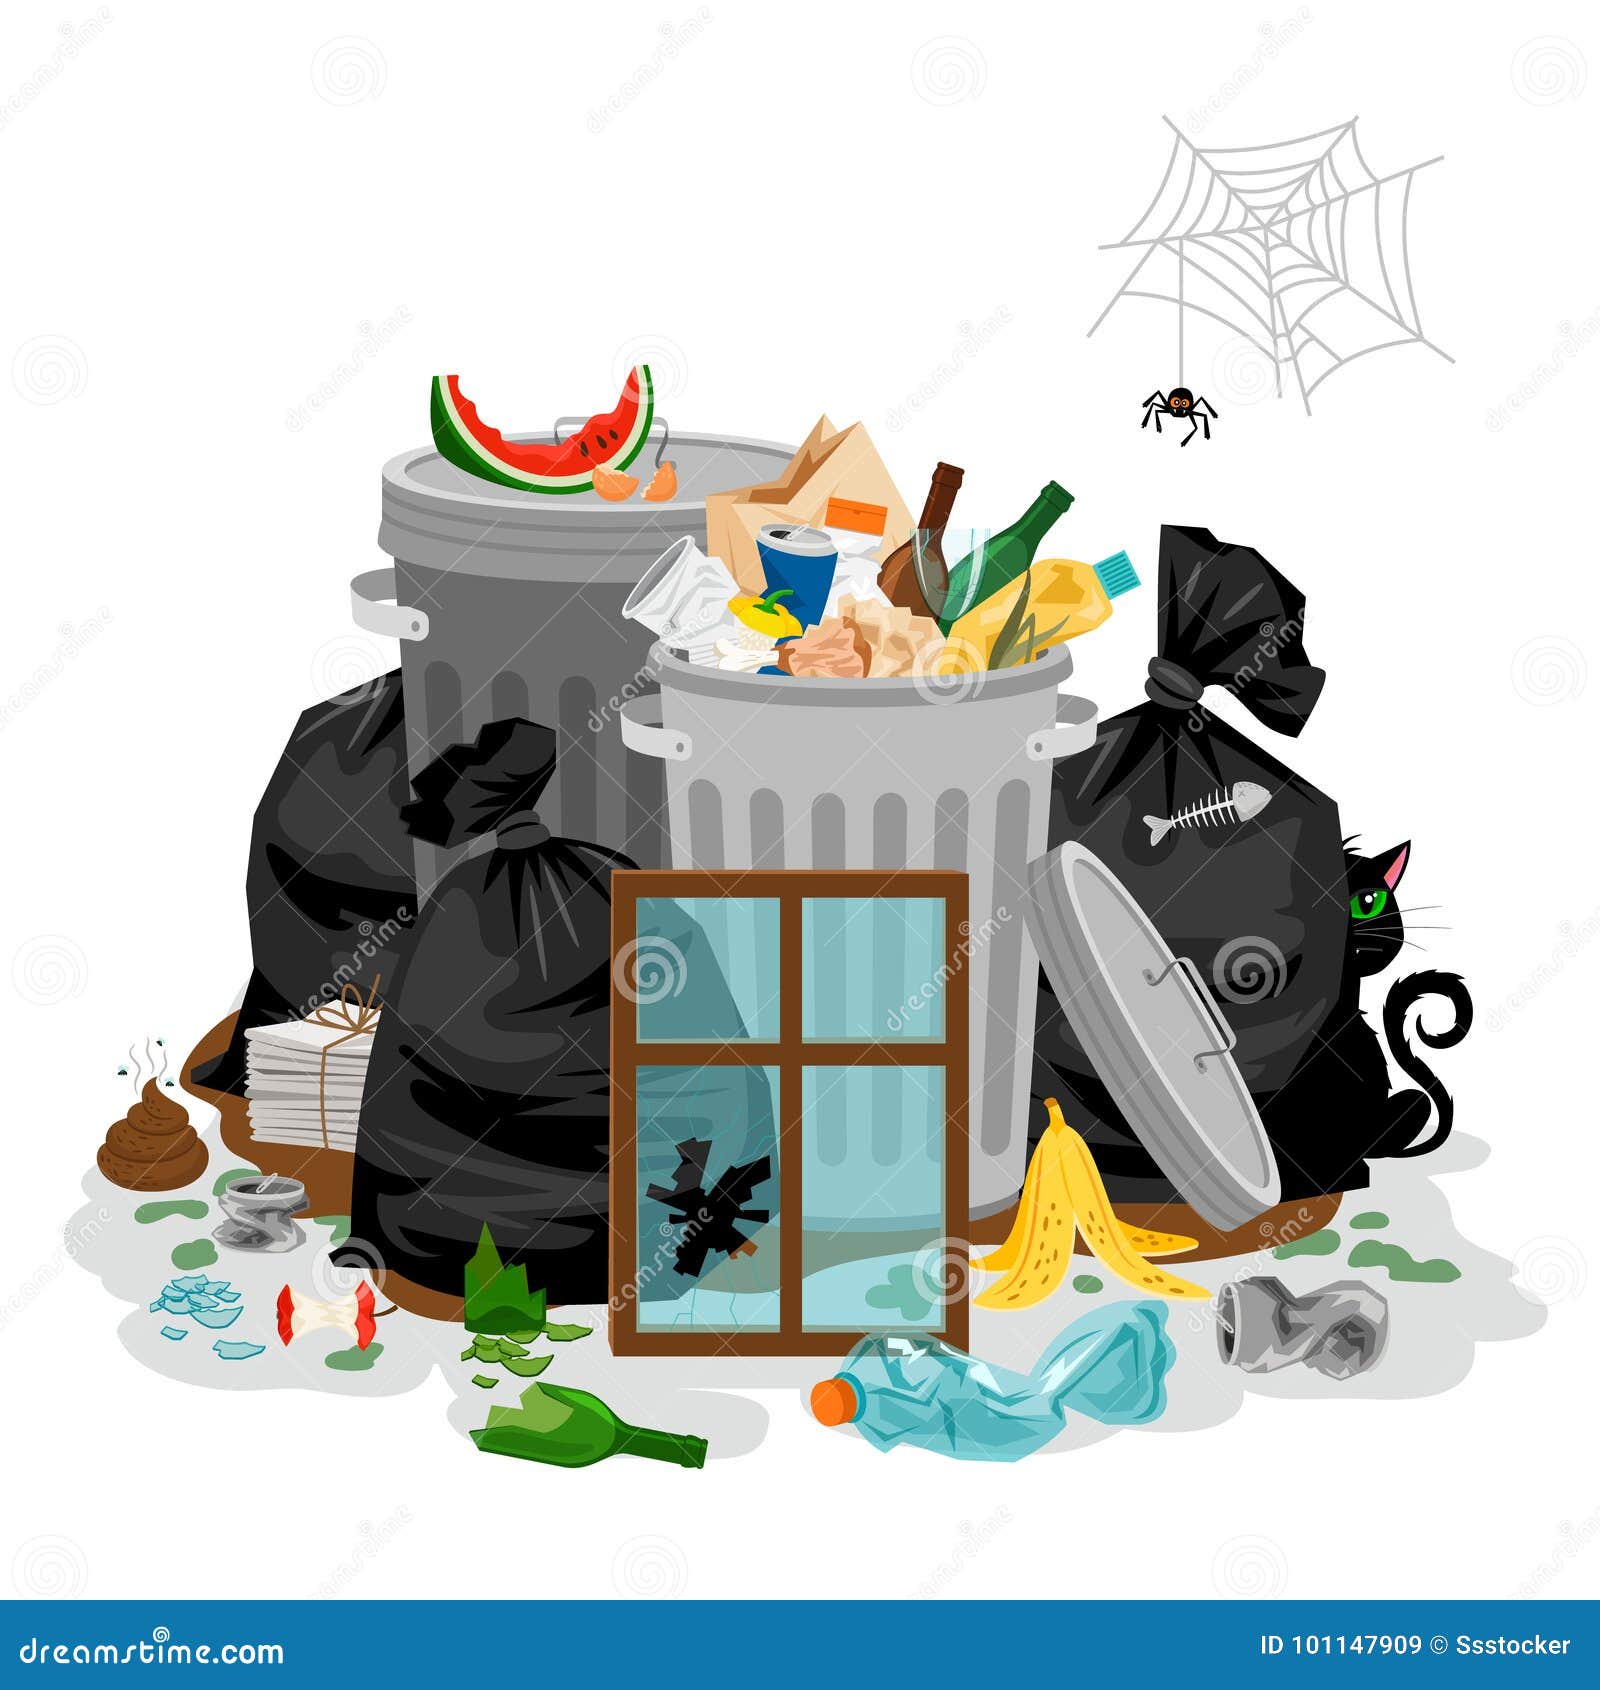 pile of garbage in white. littering waste concept with with organic and household rubbish and trash